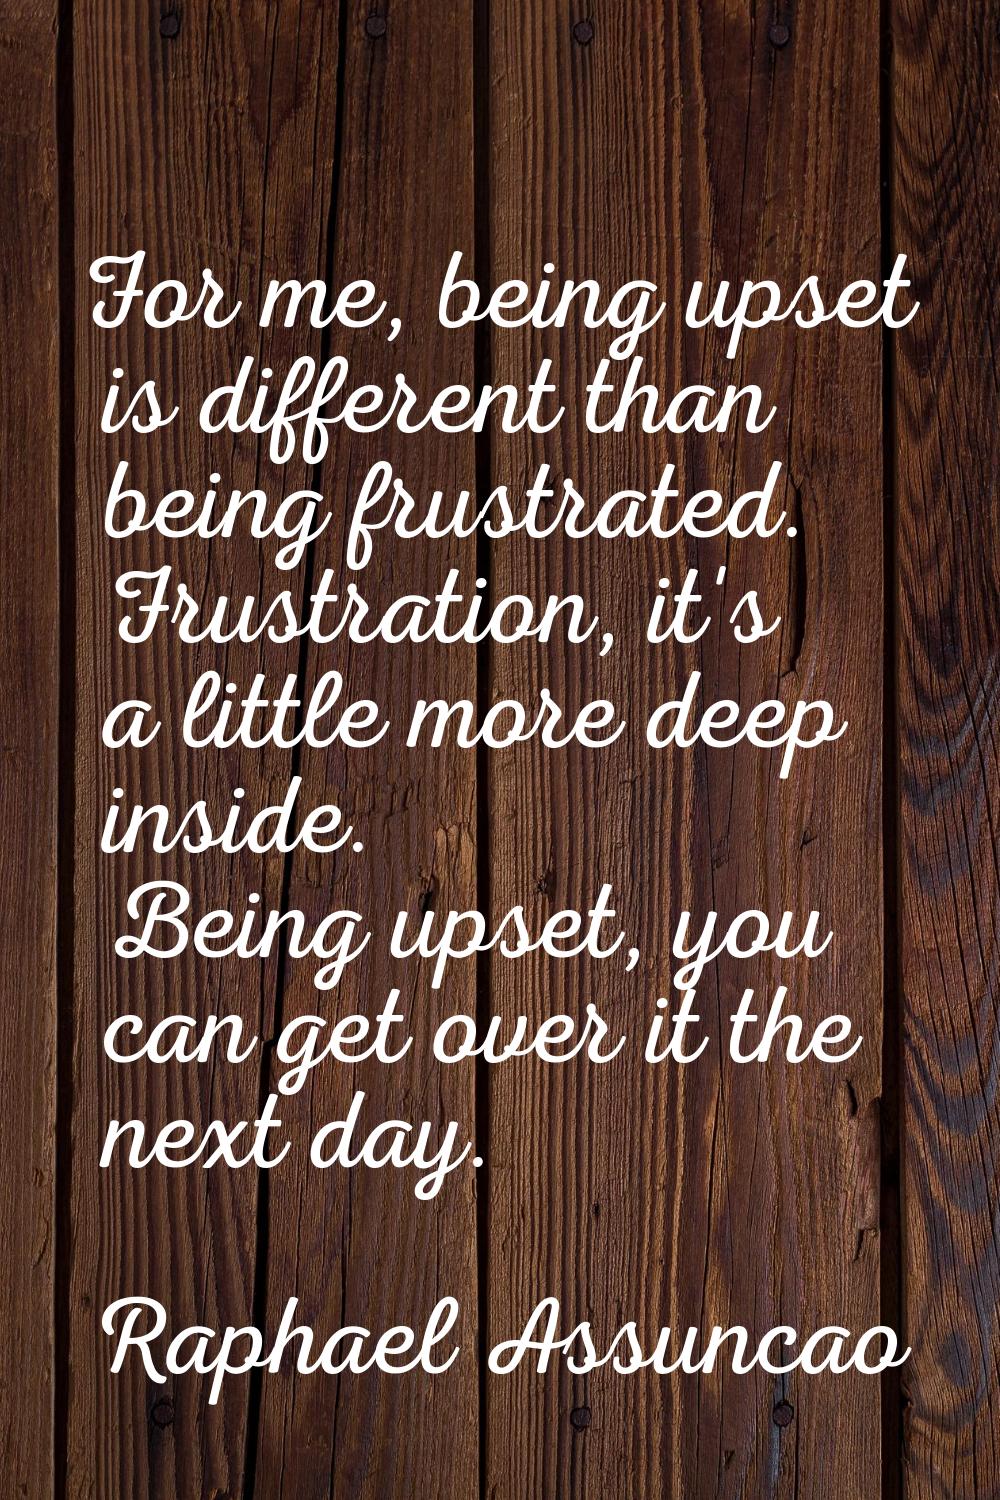 For me, being upset is different than being frustrated. Frustration, it's a little more deep inside